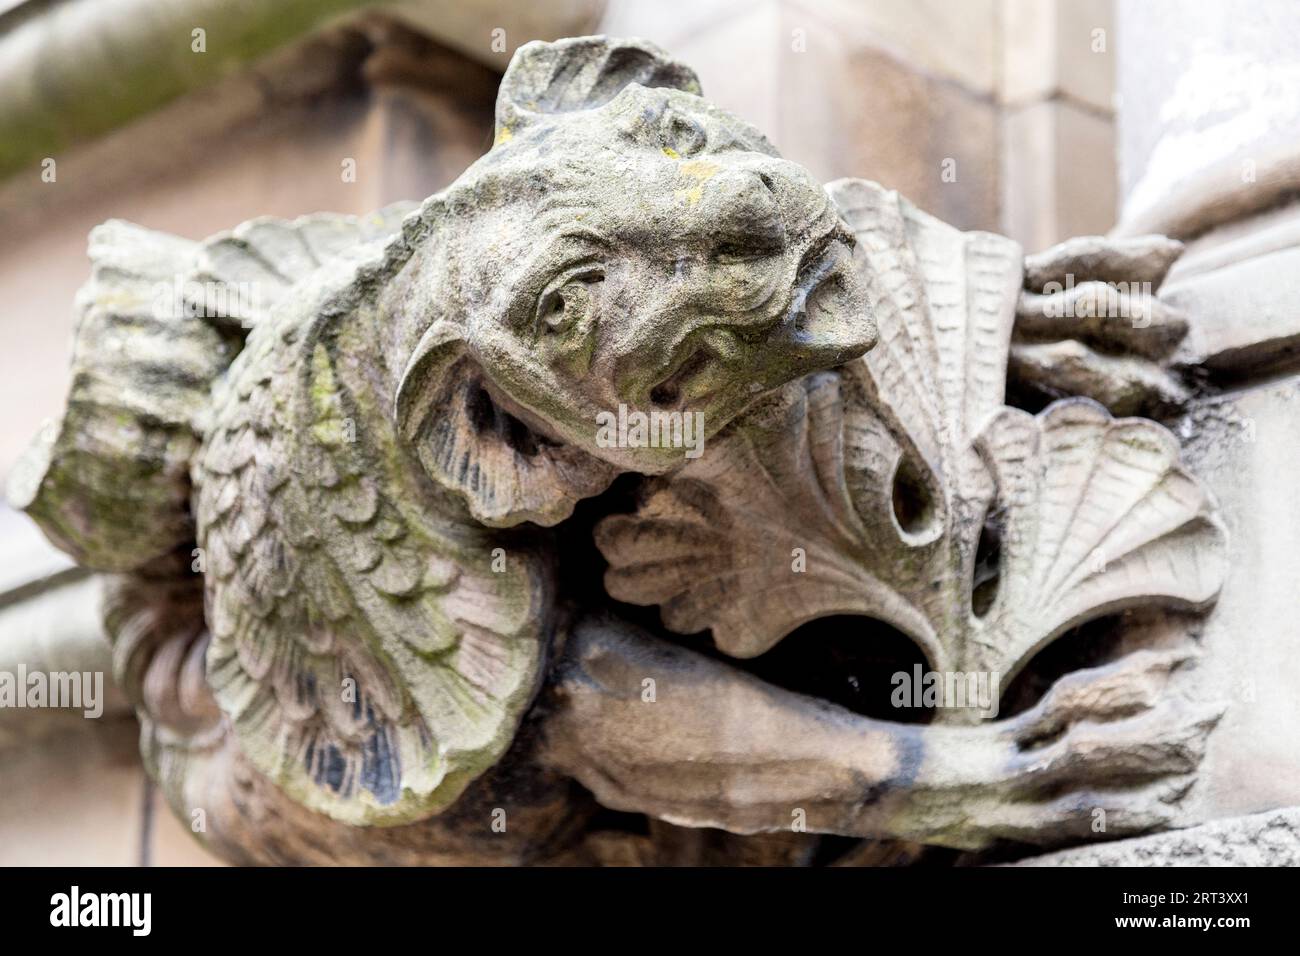 Gargoyle decorating the facade of 19th century Manchester Crown Court on Minshull Street, Manchester, England Stock Photo